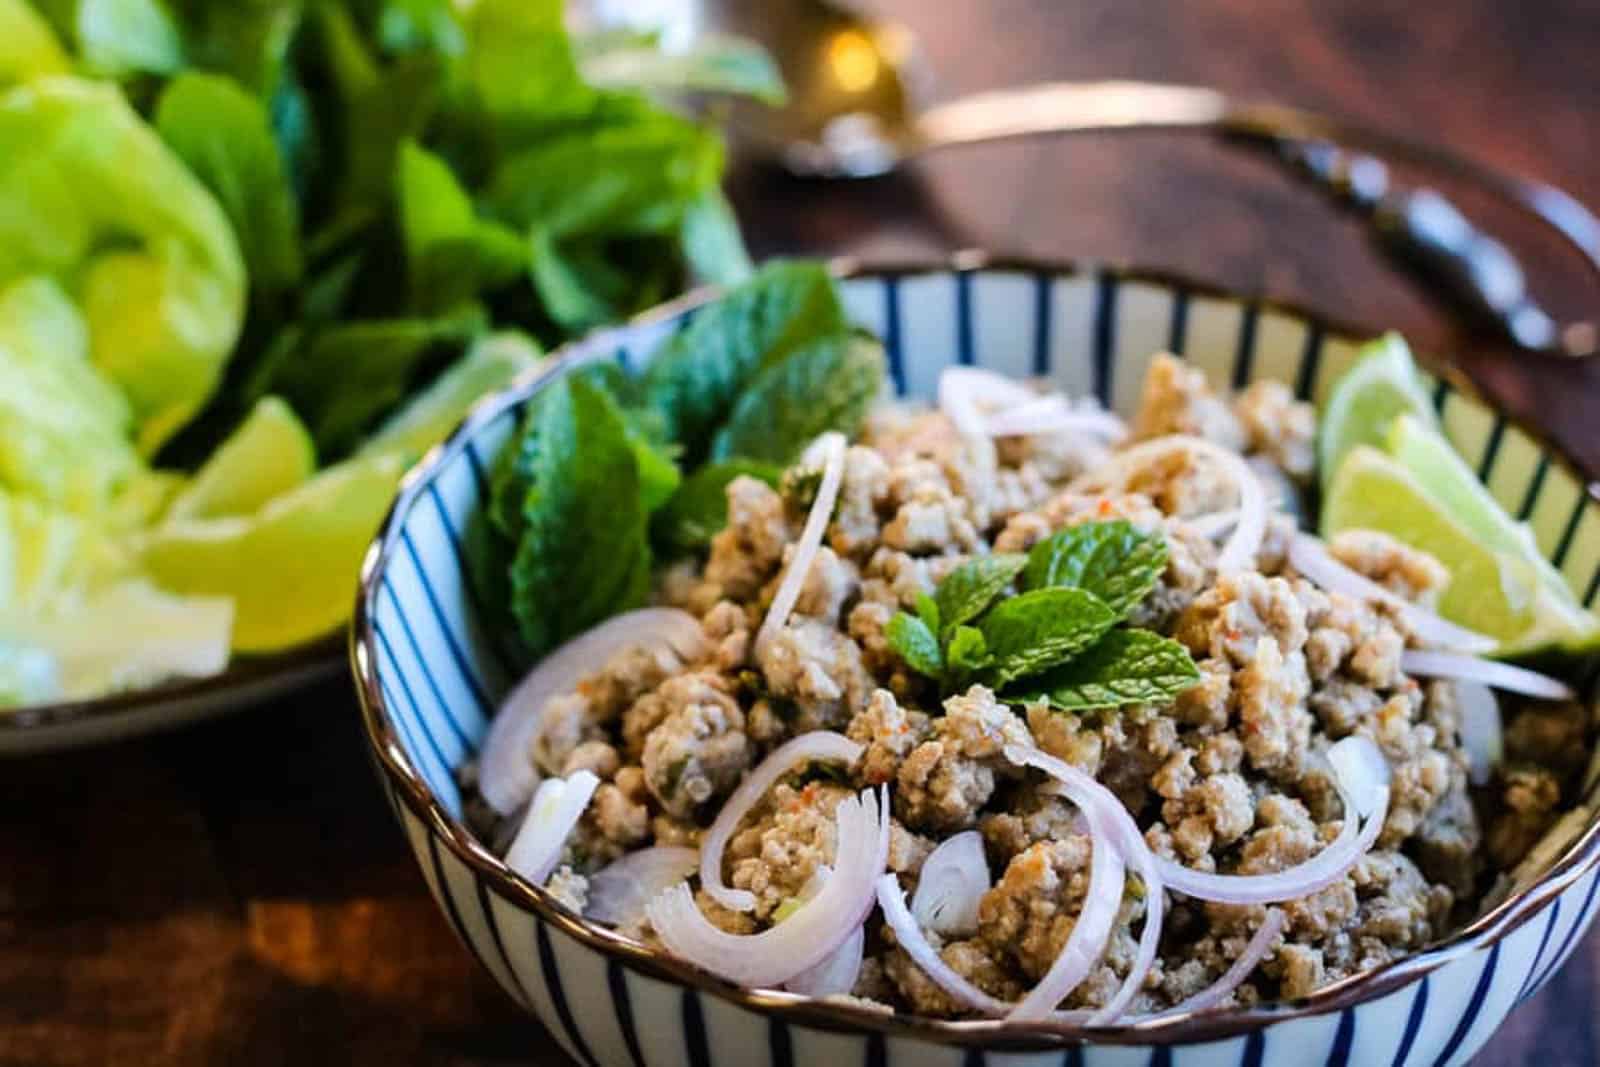 Low angle shot of a striped bowl filled with Thai larb salad garnished with shallot slices.